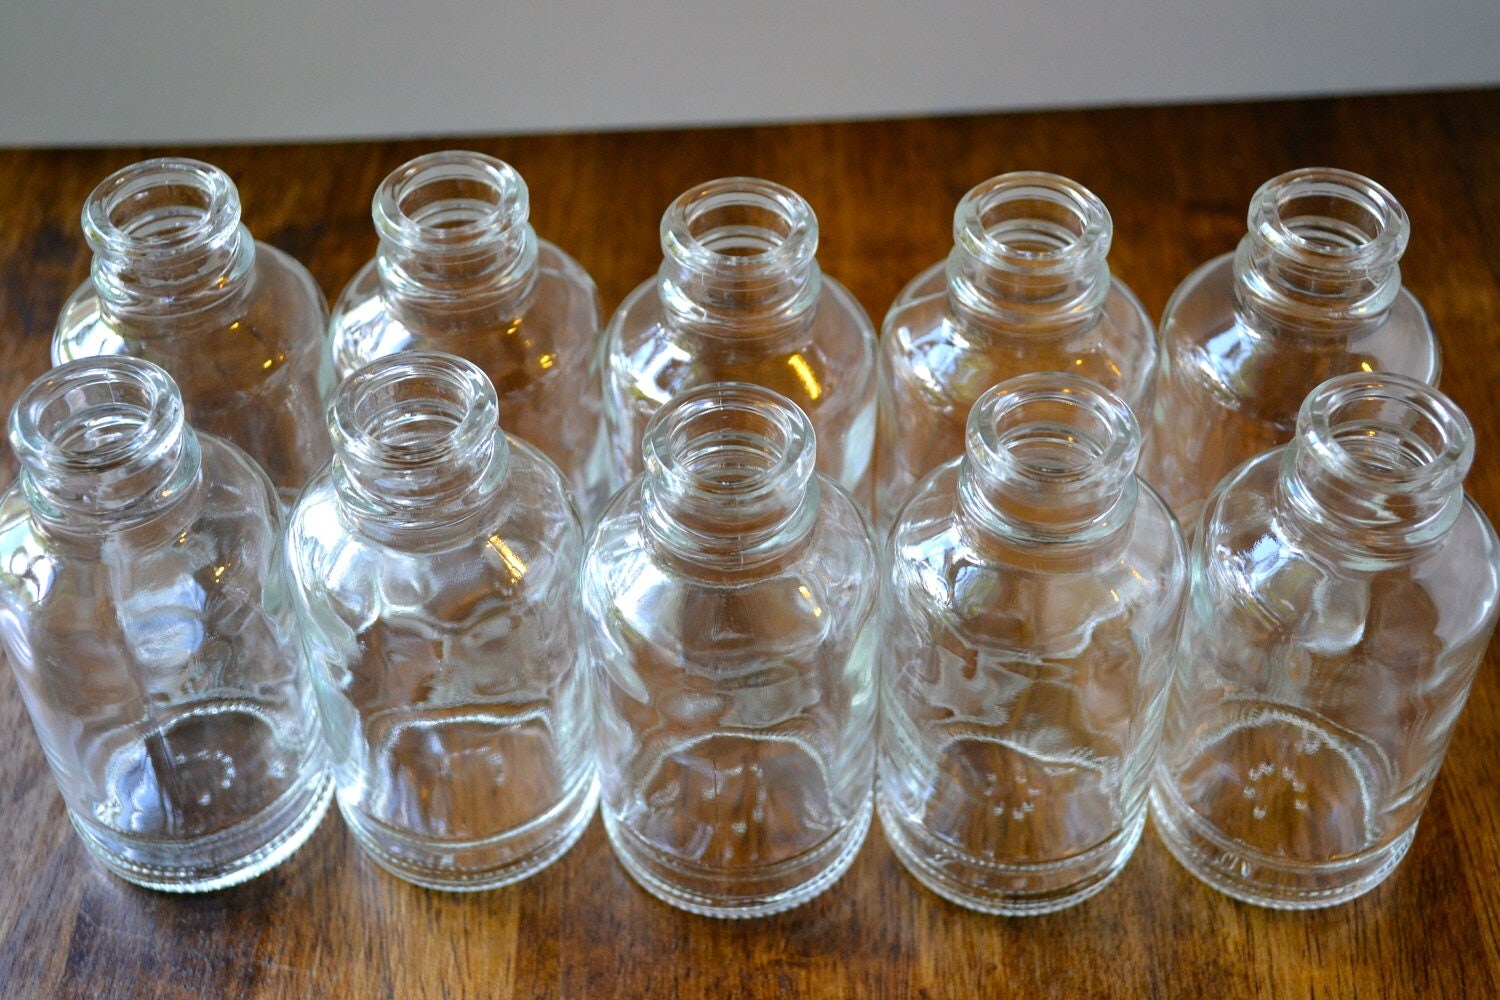 Download 10 Clear Glass Bottles/Apothecary Bottles/Bud Vases/4 oz